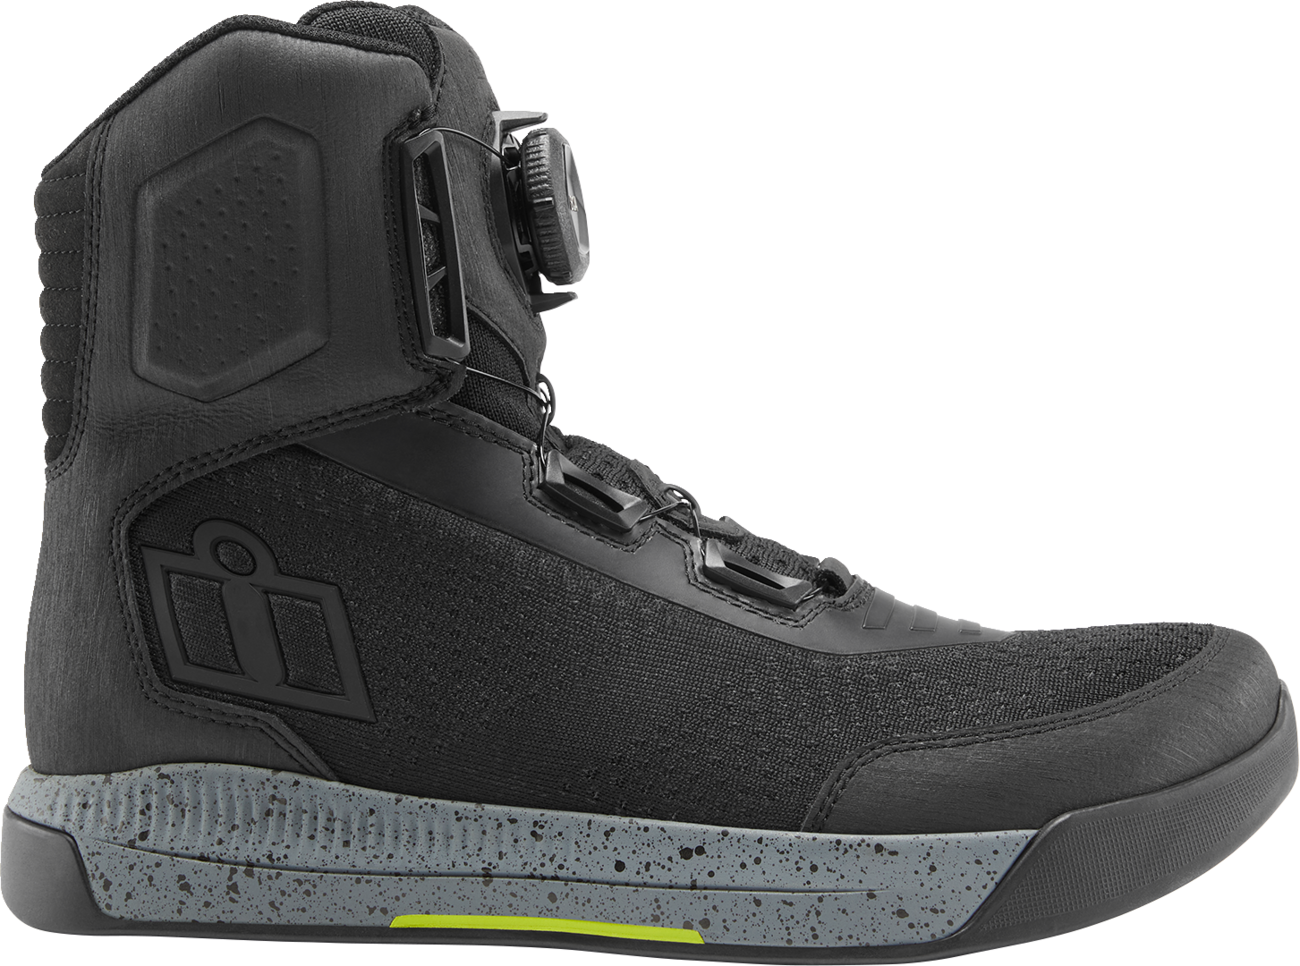 ICON Overlord™ Vented CE Boots - Black - Size 11 3403-1263